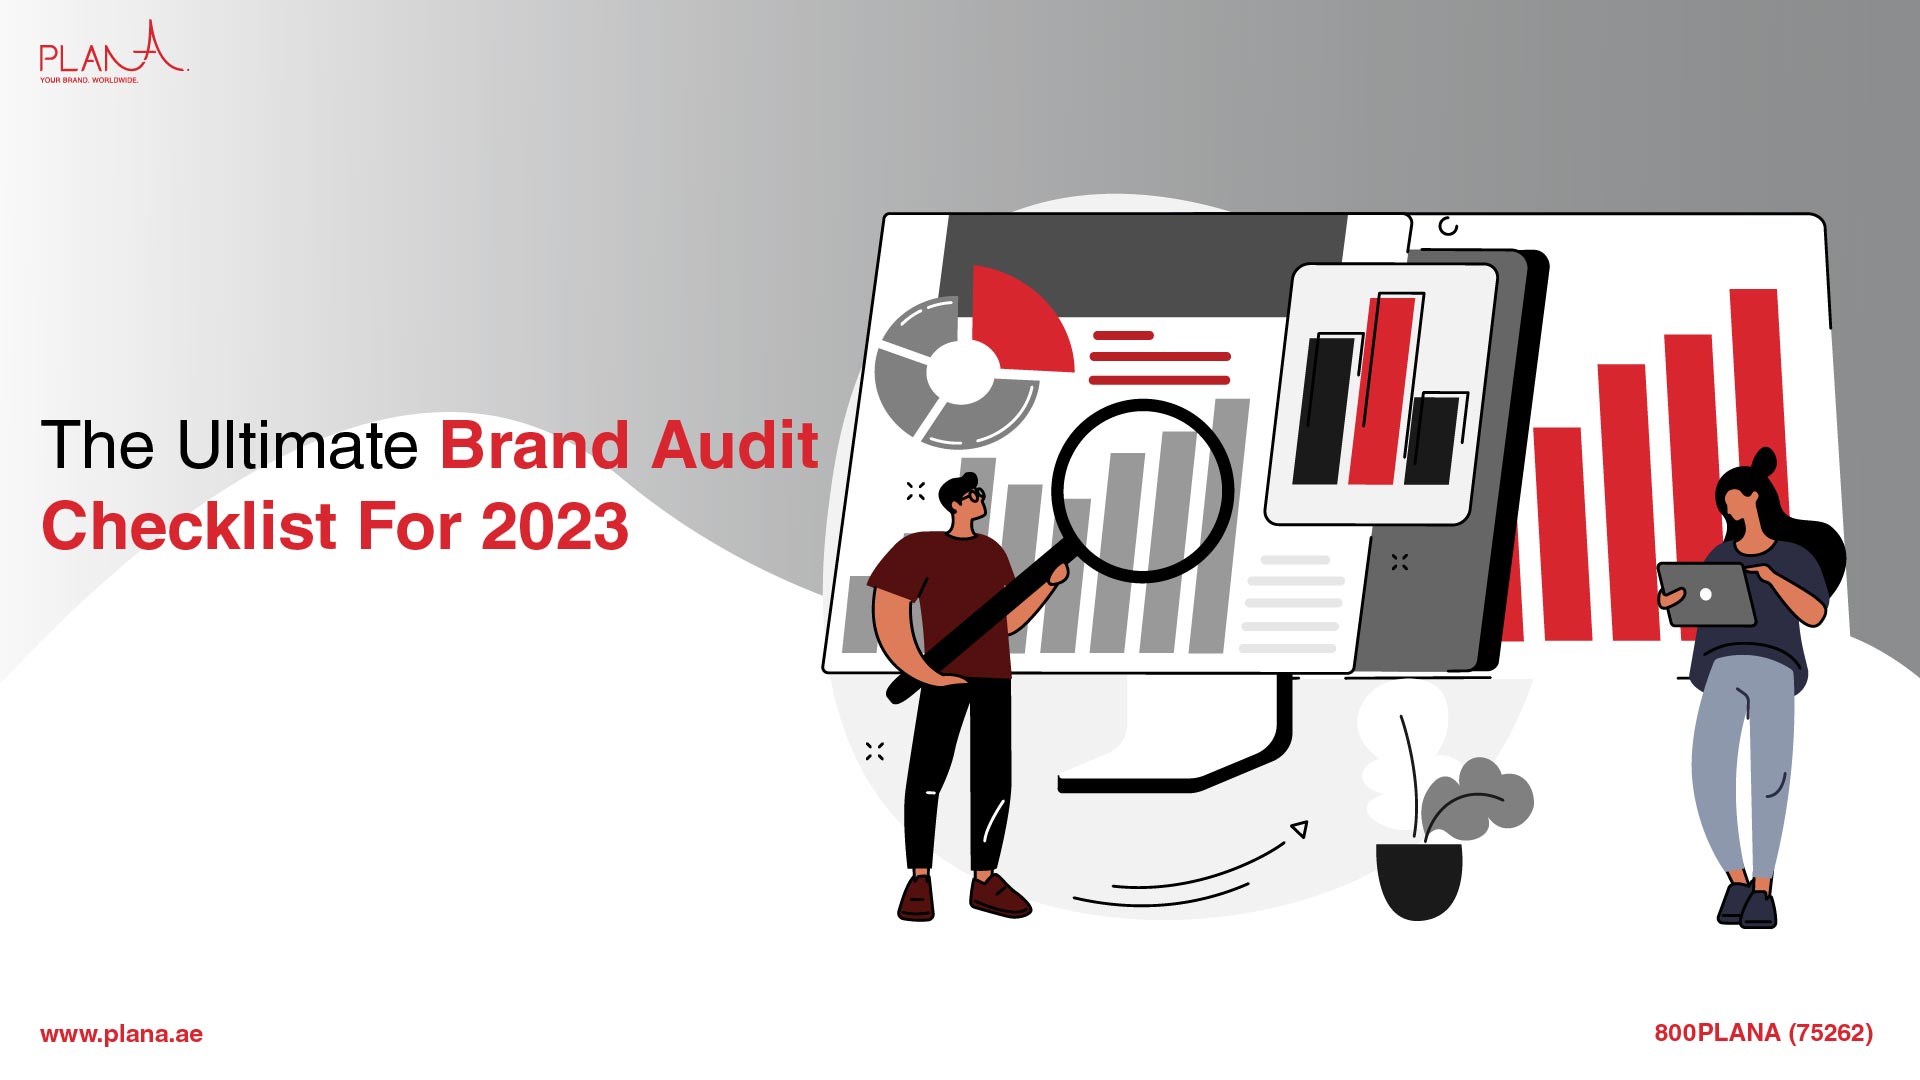 The Ultimate Brand Audit Checklist For 2023